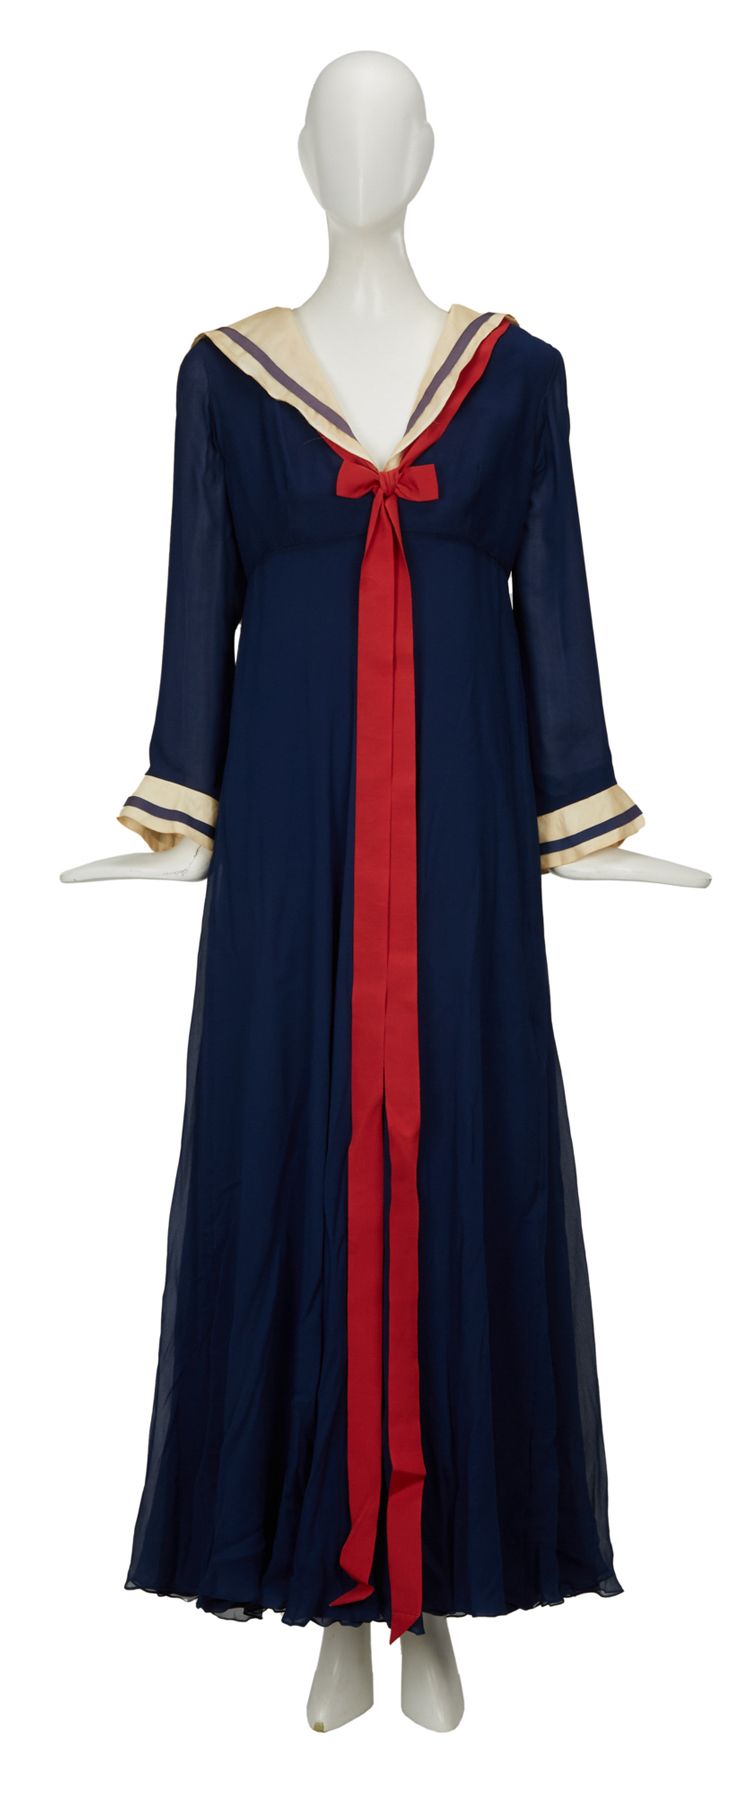 Sailor dress worn by Barbra Streisand in 1965 to be auctioned this month.